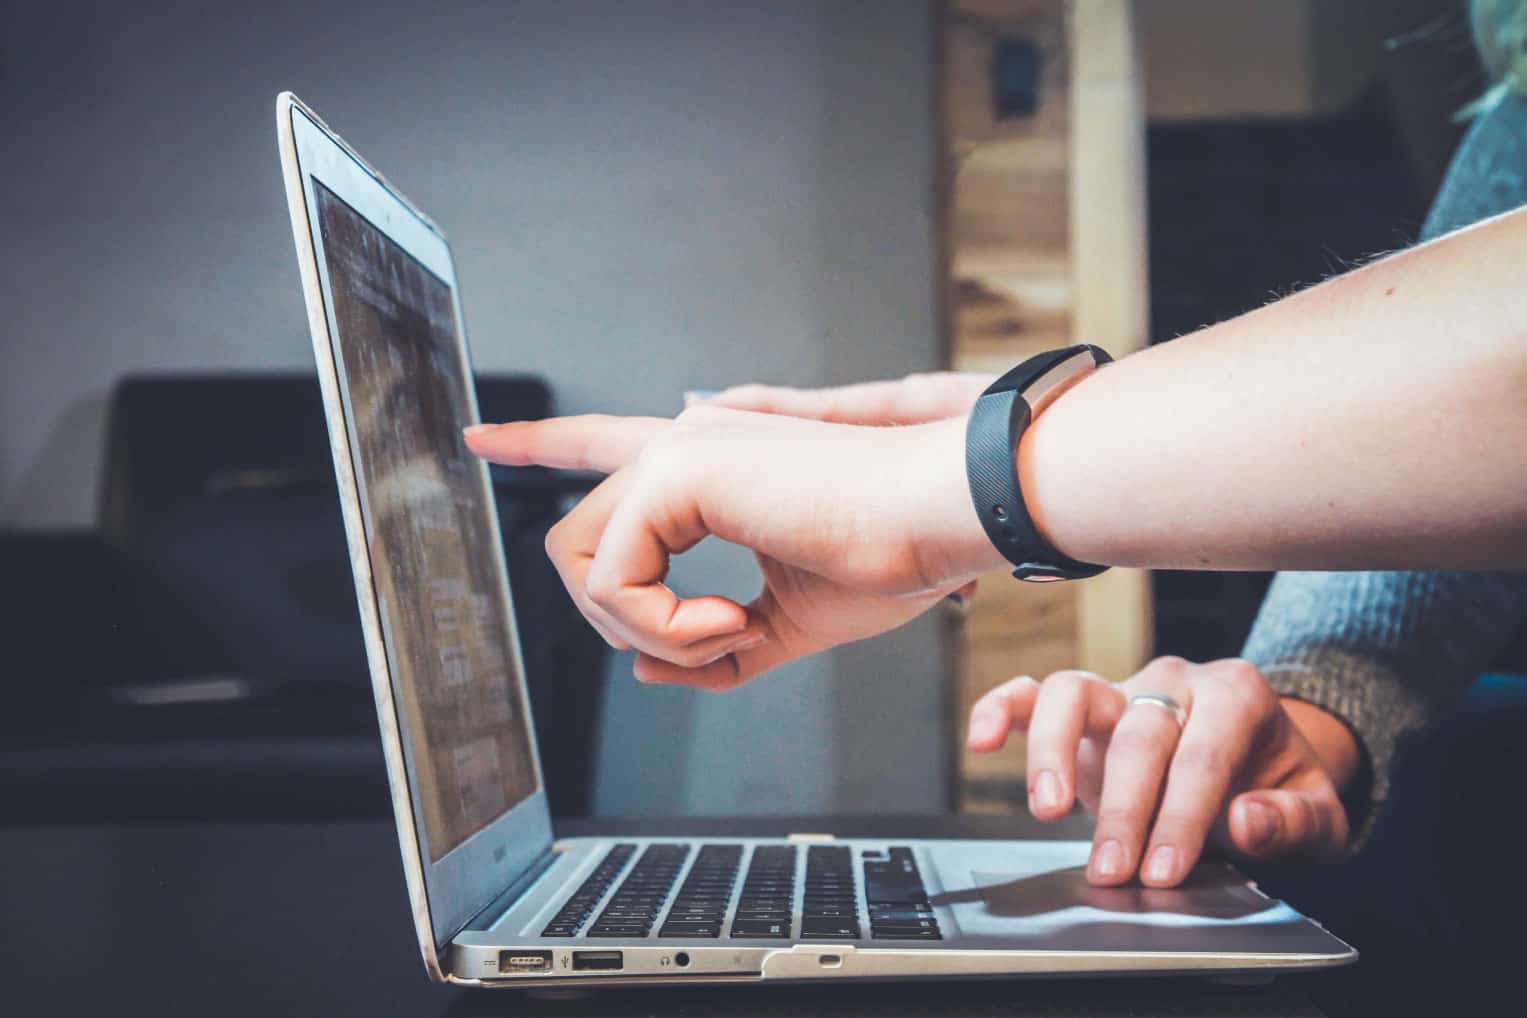 Hands pointing at a computer screen